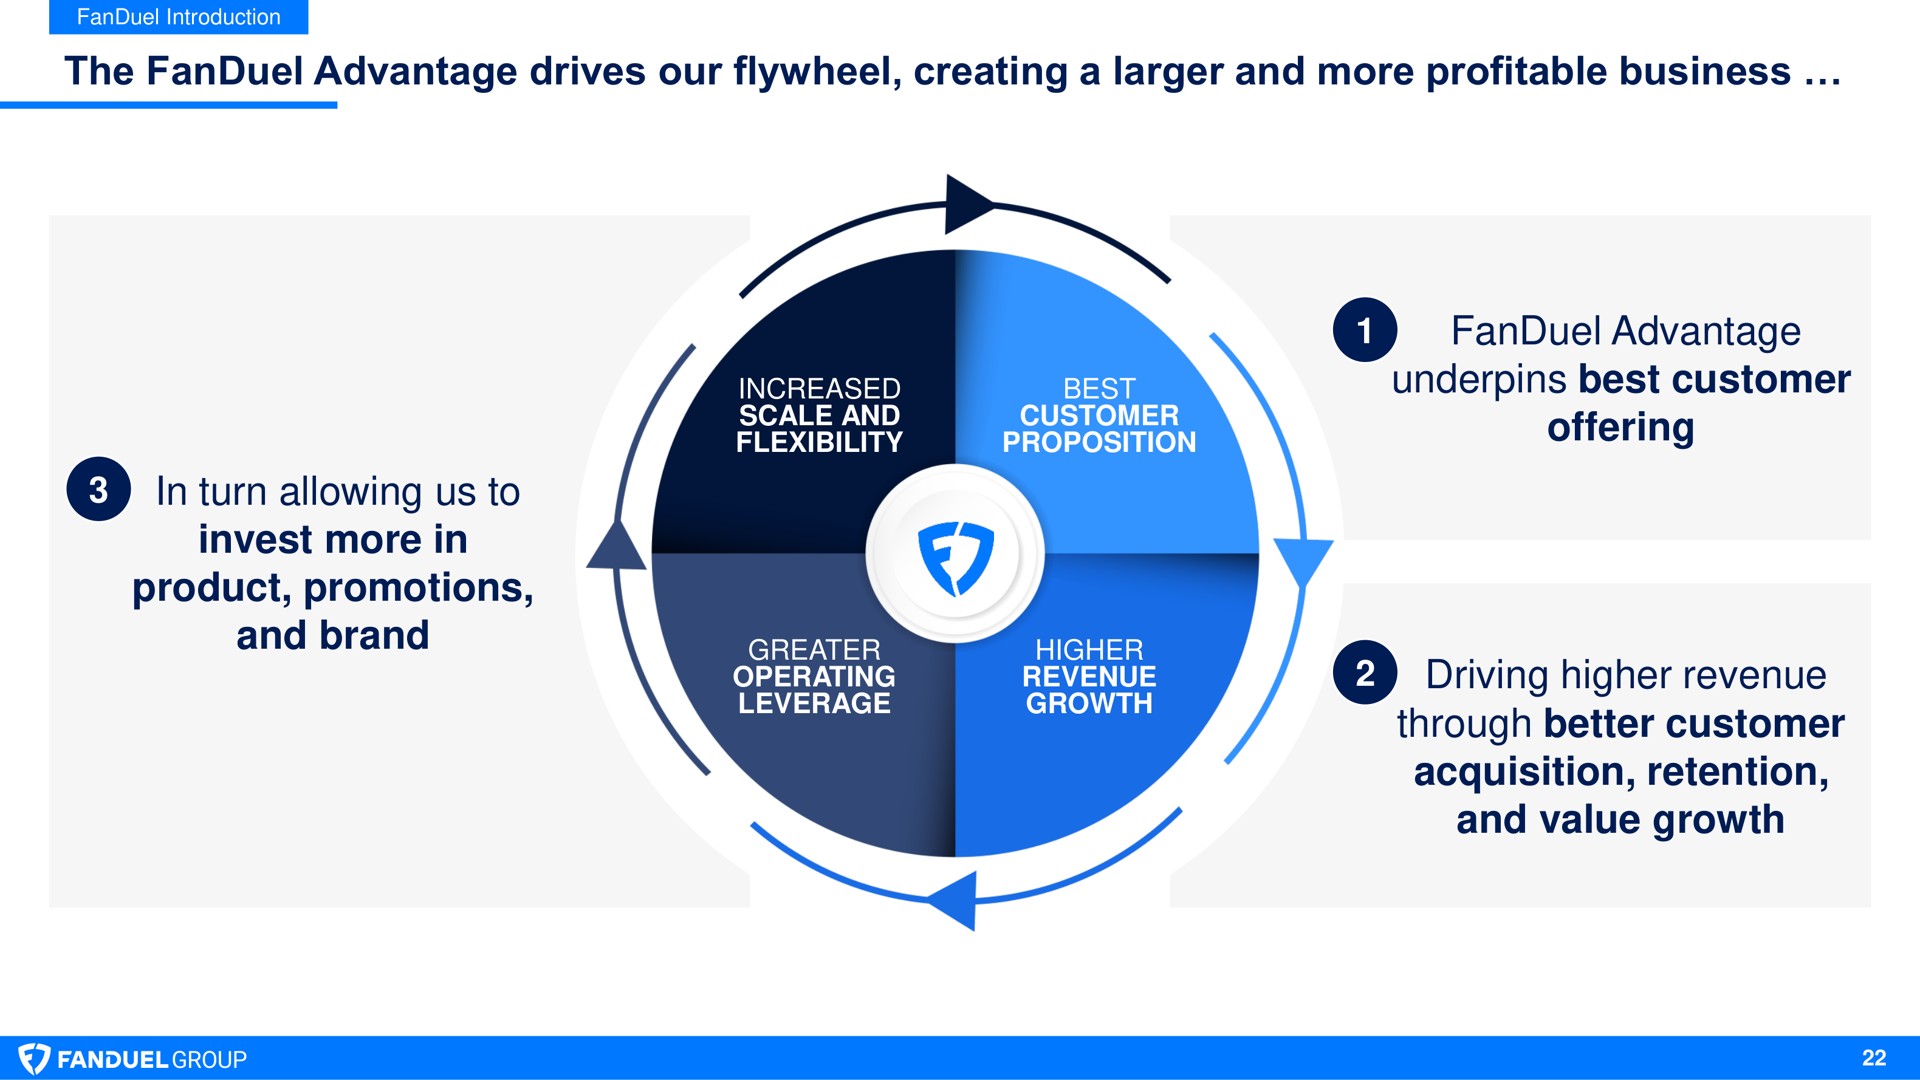 the advantage drives our flywheel creating a and more profitable business in turn allowing us to invest more in product promotions and brand scale advantage advantage underpins best customer offering driving higher revenue through better customer acquisition retention and value growth increased proposition operating | Flutter